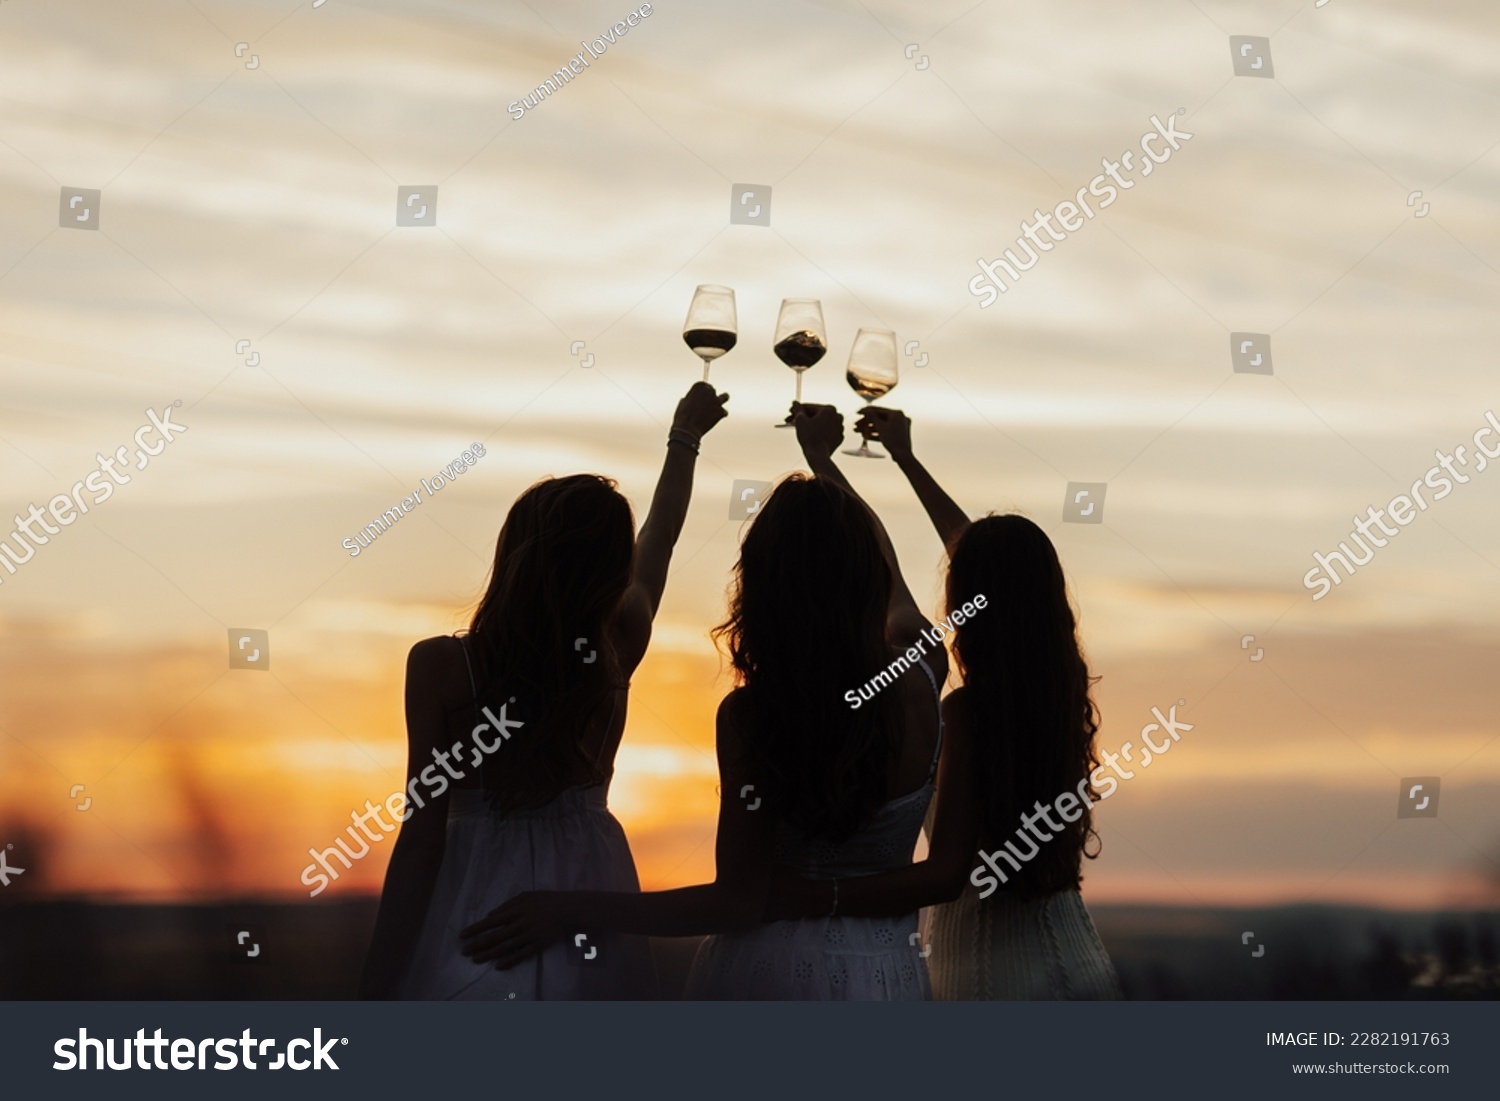 Silhouettes of women in the park in evening sunlight. The lights of a sun. The company of female friends enjoys a summer picnic and raise glasses with wine.  #2282191763